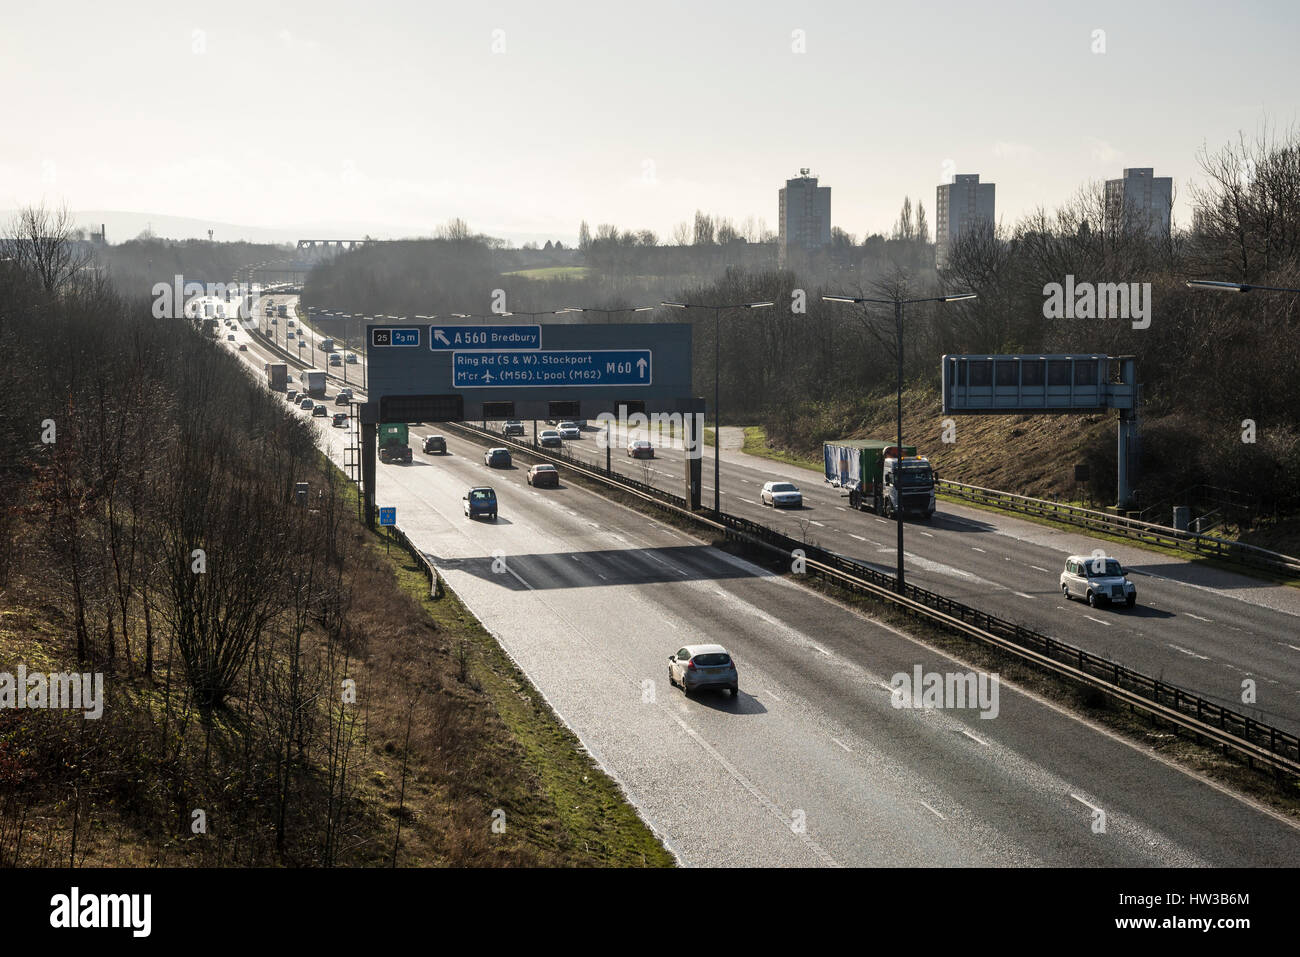 Vehicles on the M60 motorway near Stockport, Greater Manchester, England. Stock Photo